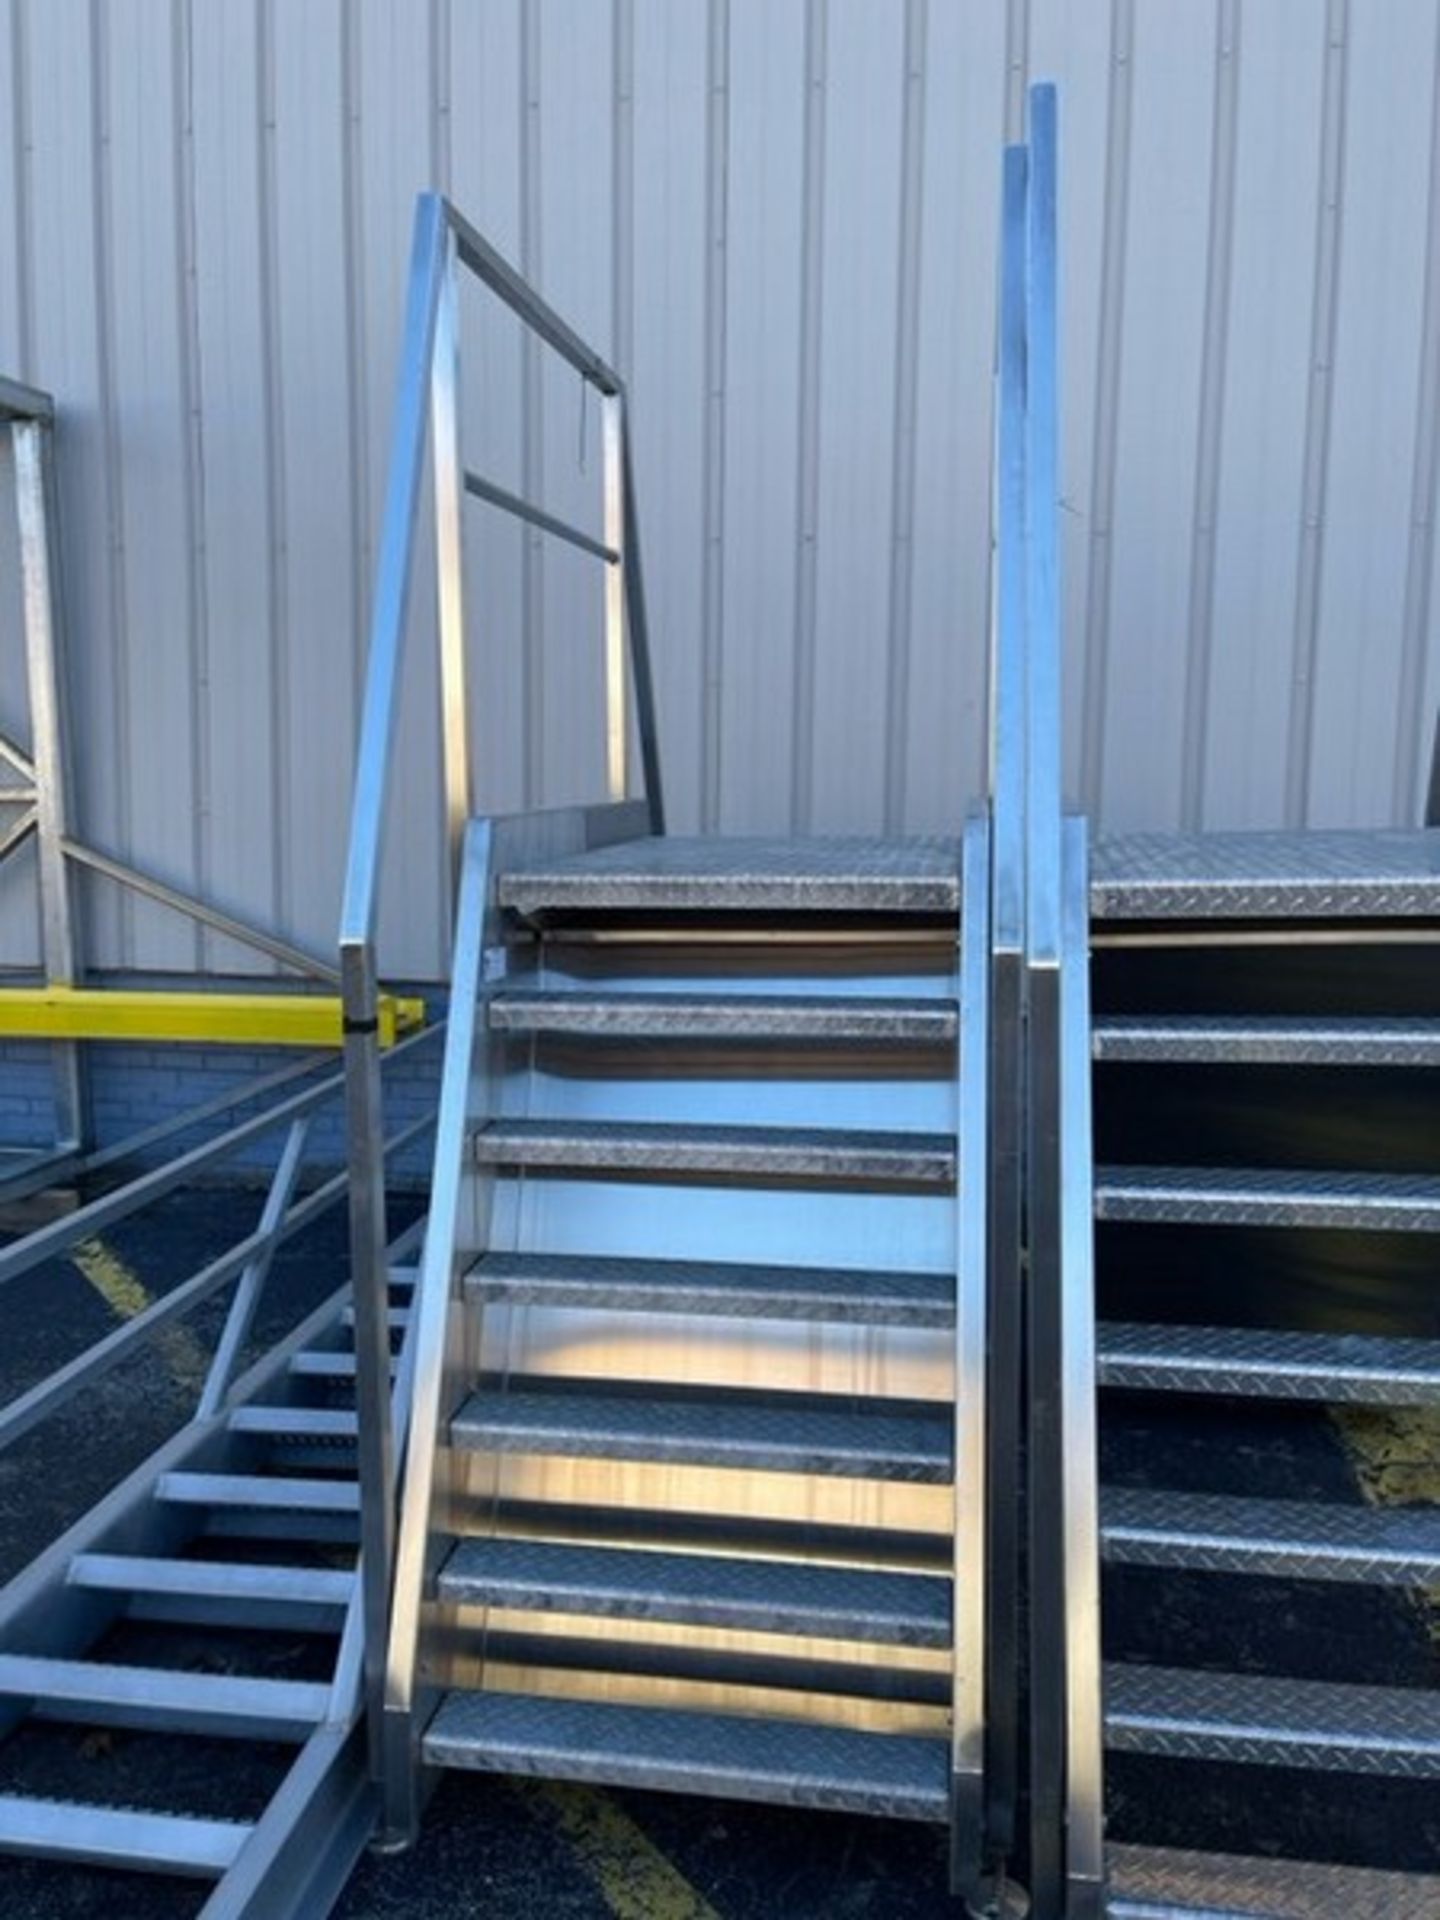 S/S & Aluminum Crossover Stairs,Overall Dims.: Aprox. 80" L x 37" W x 56" H, with Aprox. 34" L x 30"